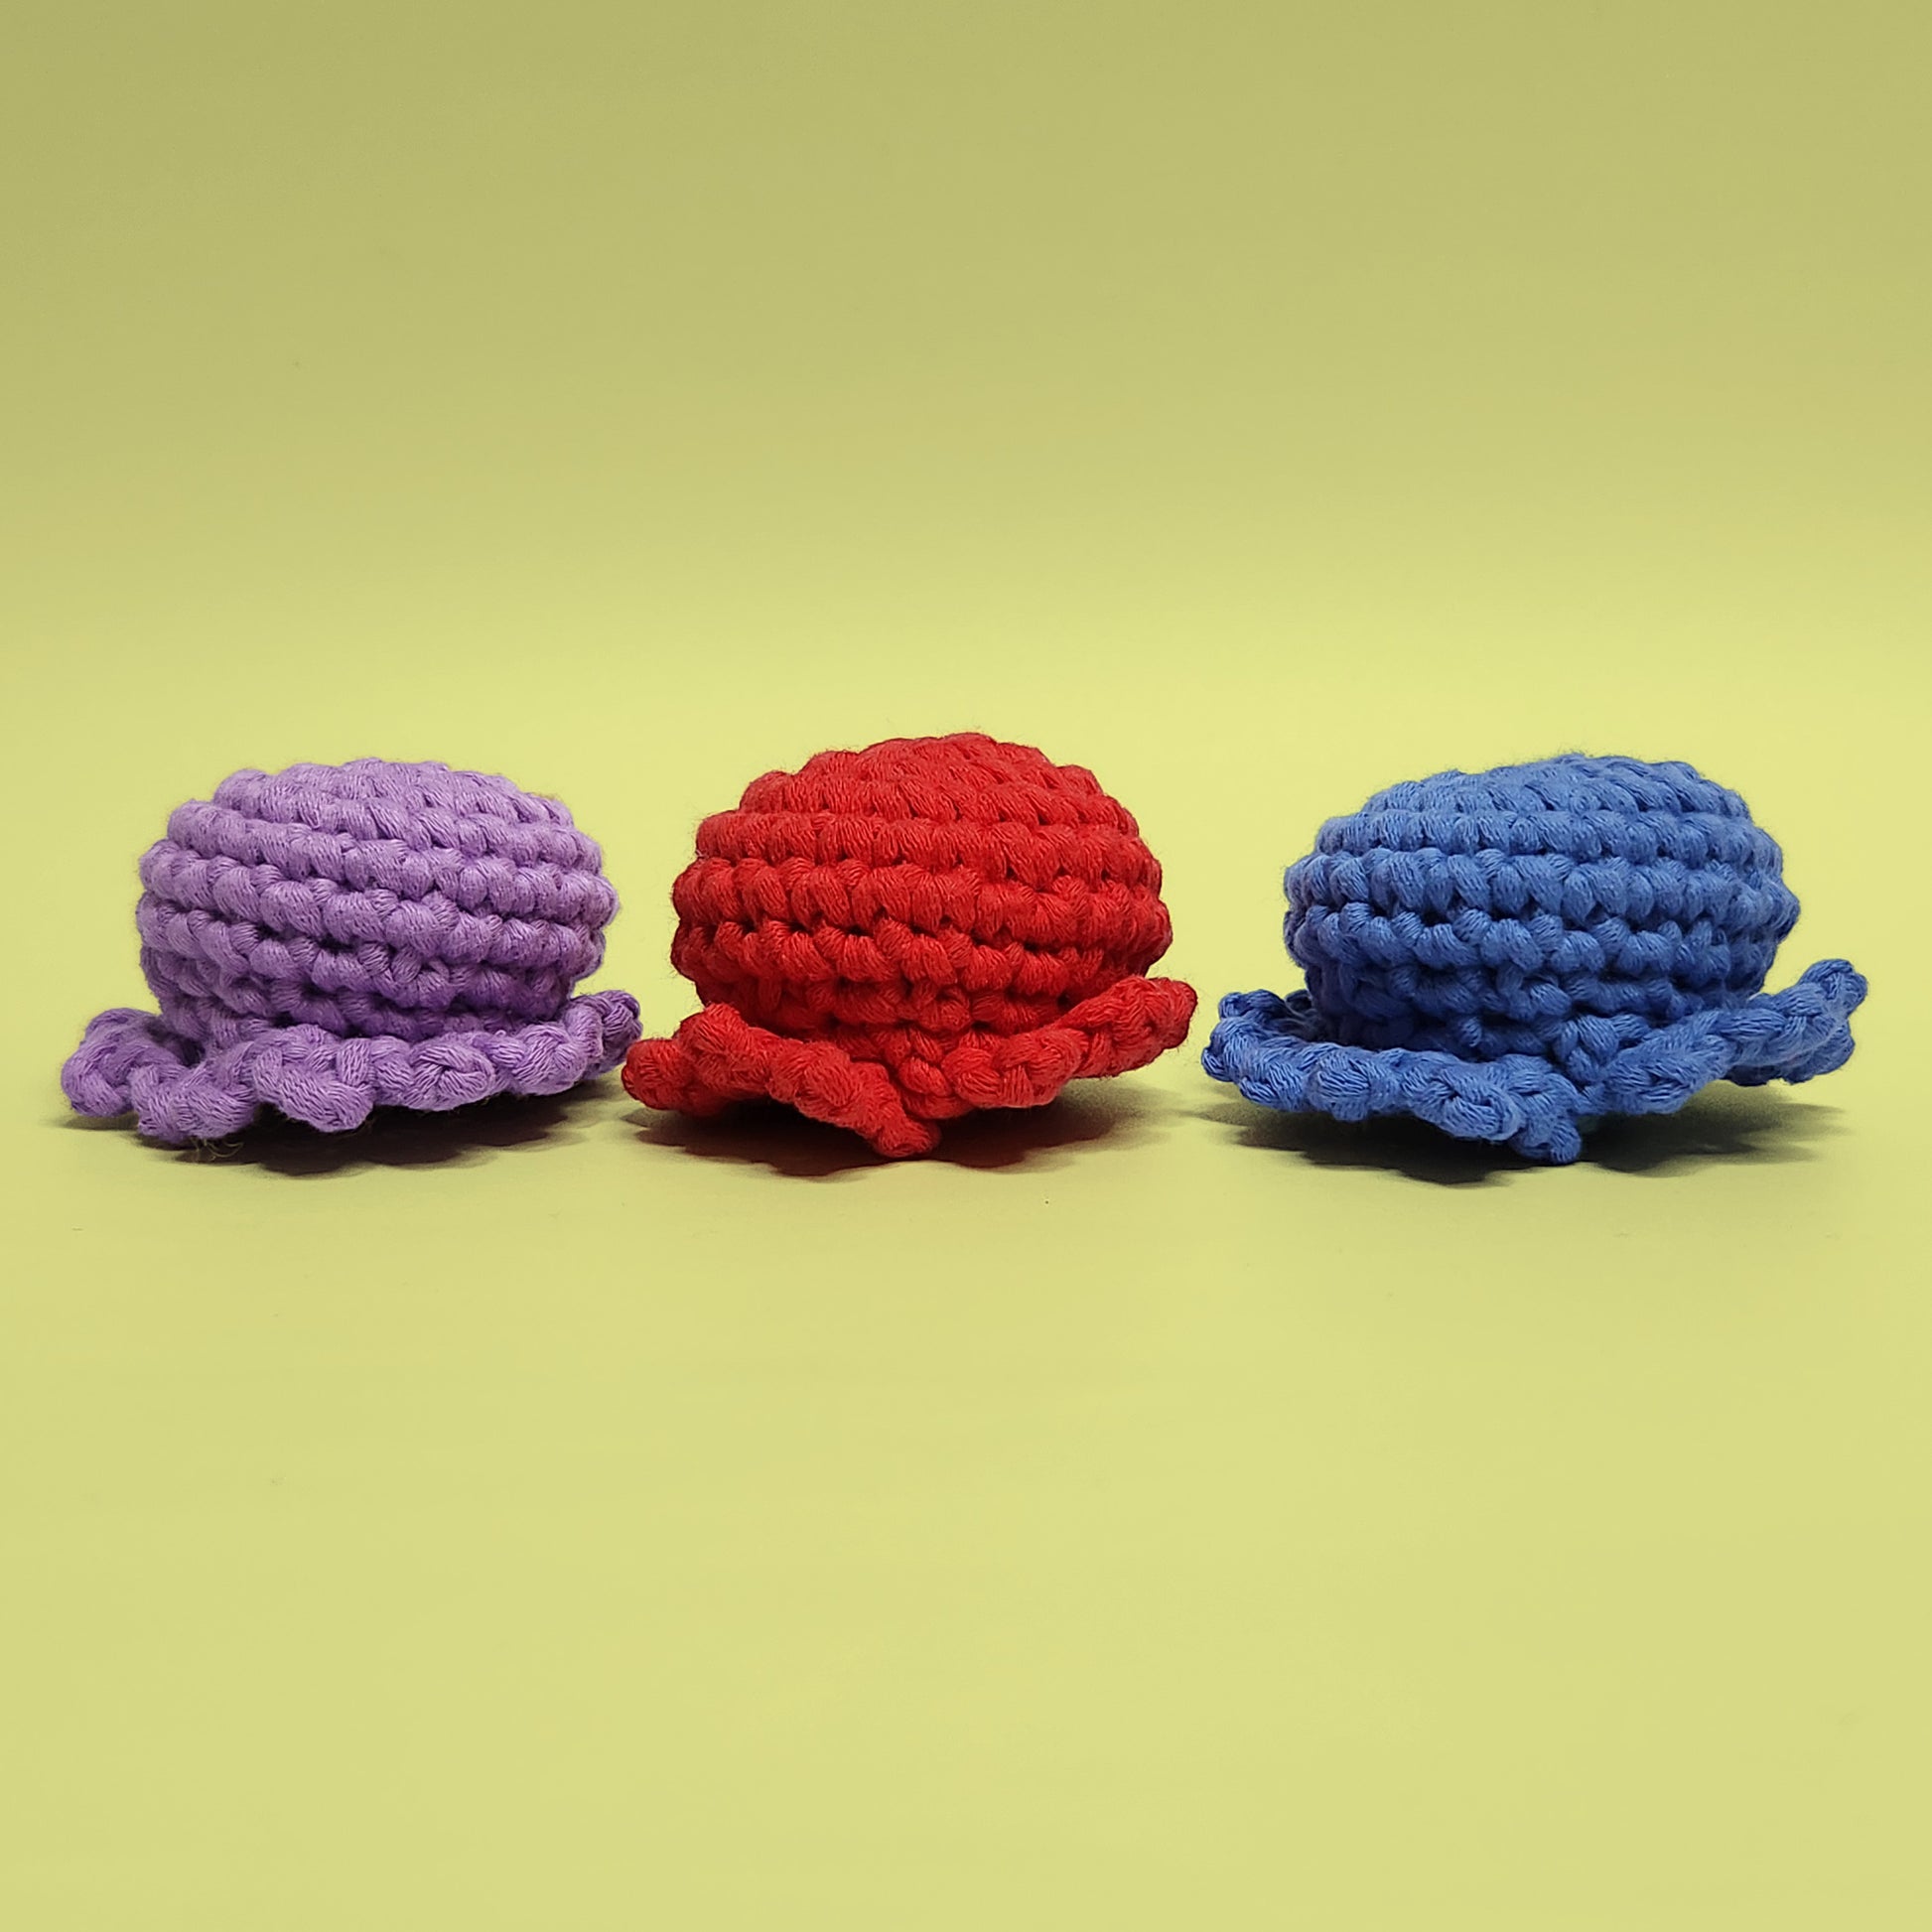 Red, blue, and purple octopus crochet amigurumi set. Handcrafted from our beginner-friendly crochet kit, perfect for those new to crocheting. Back view displaying vibrant colors.